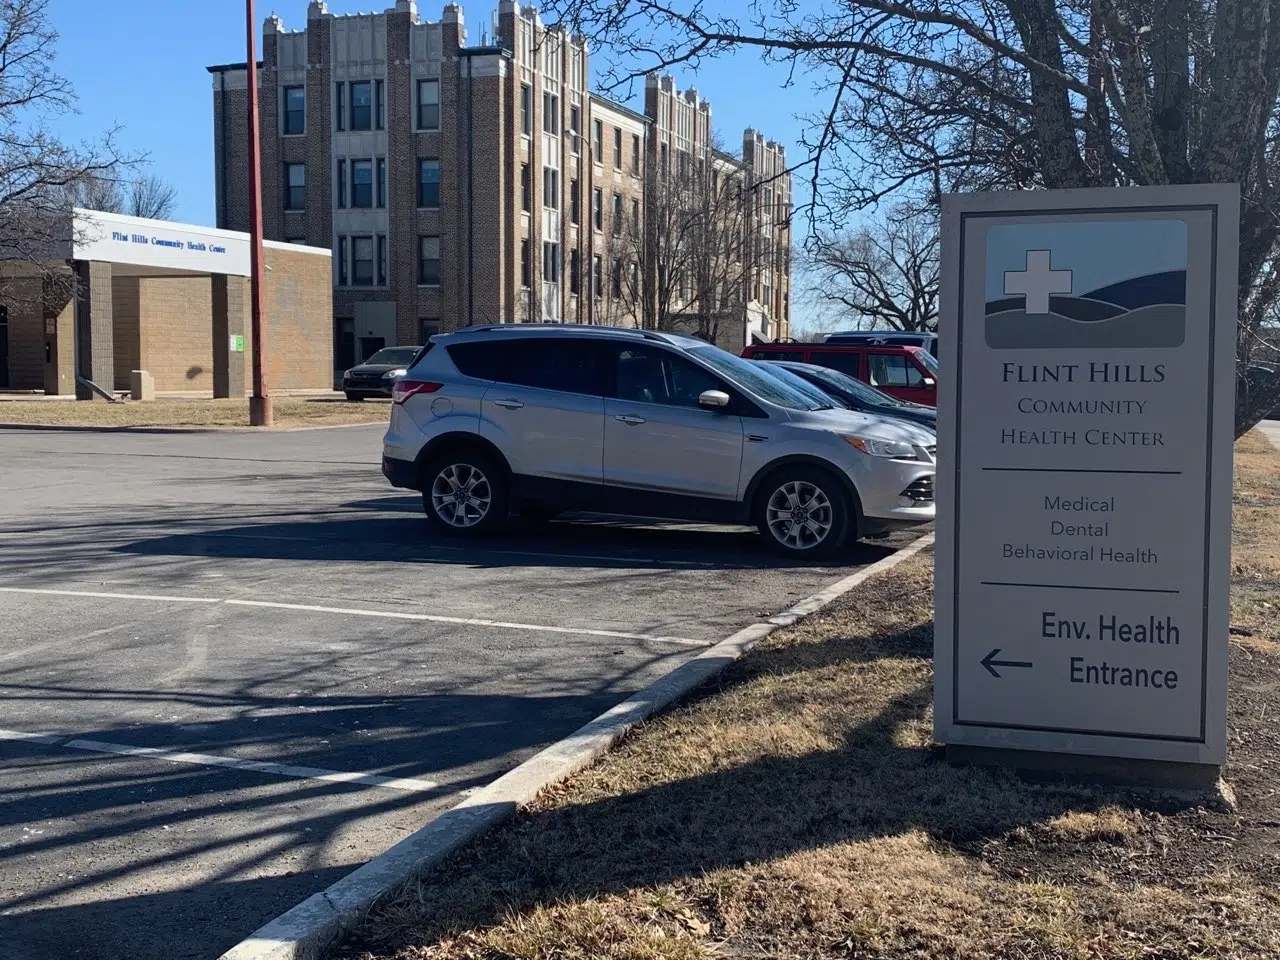 Flint Hills Community Health Center to discuss COVID-19 plans during monthly meeting